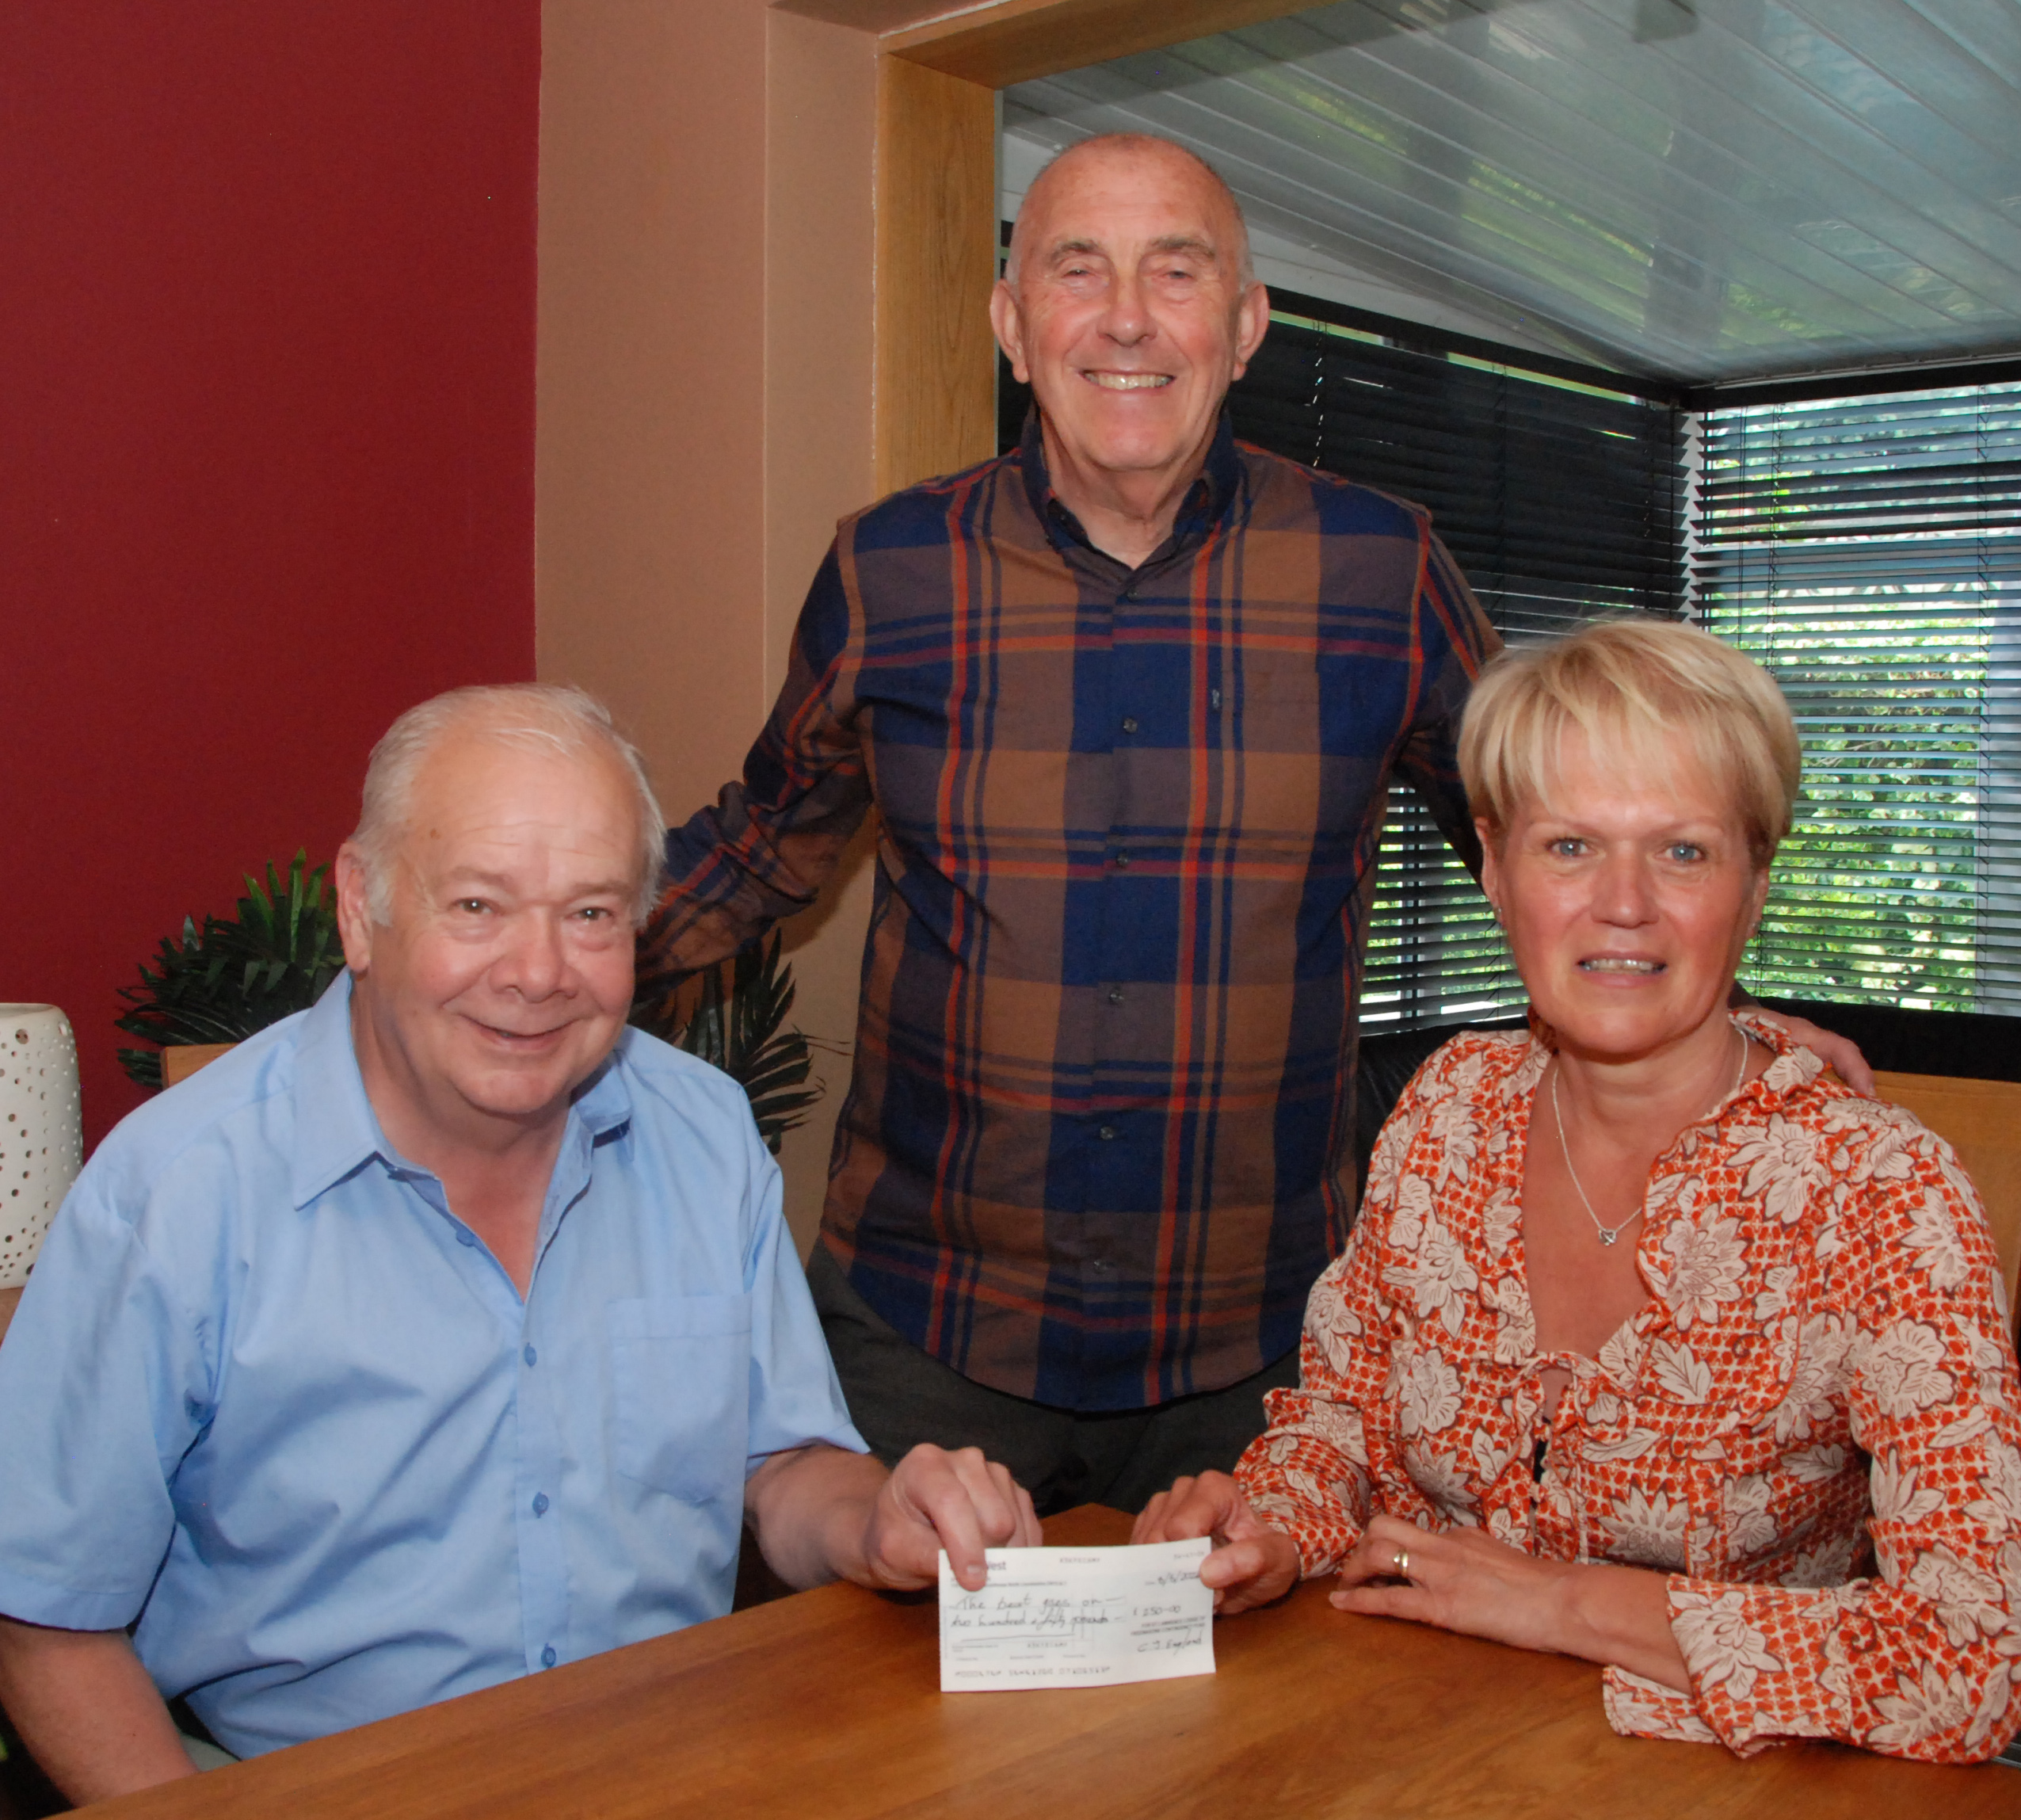 Scunthorpe Freemason Dave Gibson, left, hands the £250 donation from St Lawrence Lodge to Gill Ayling watched by husband Steve.